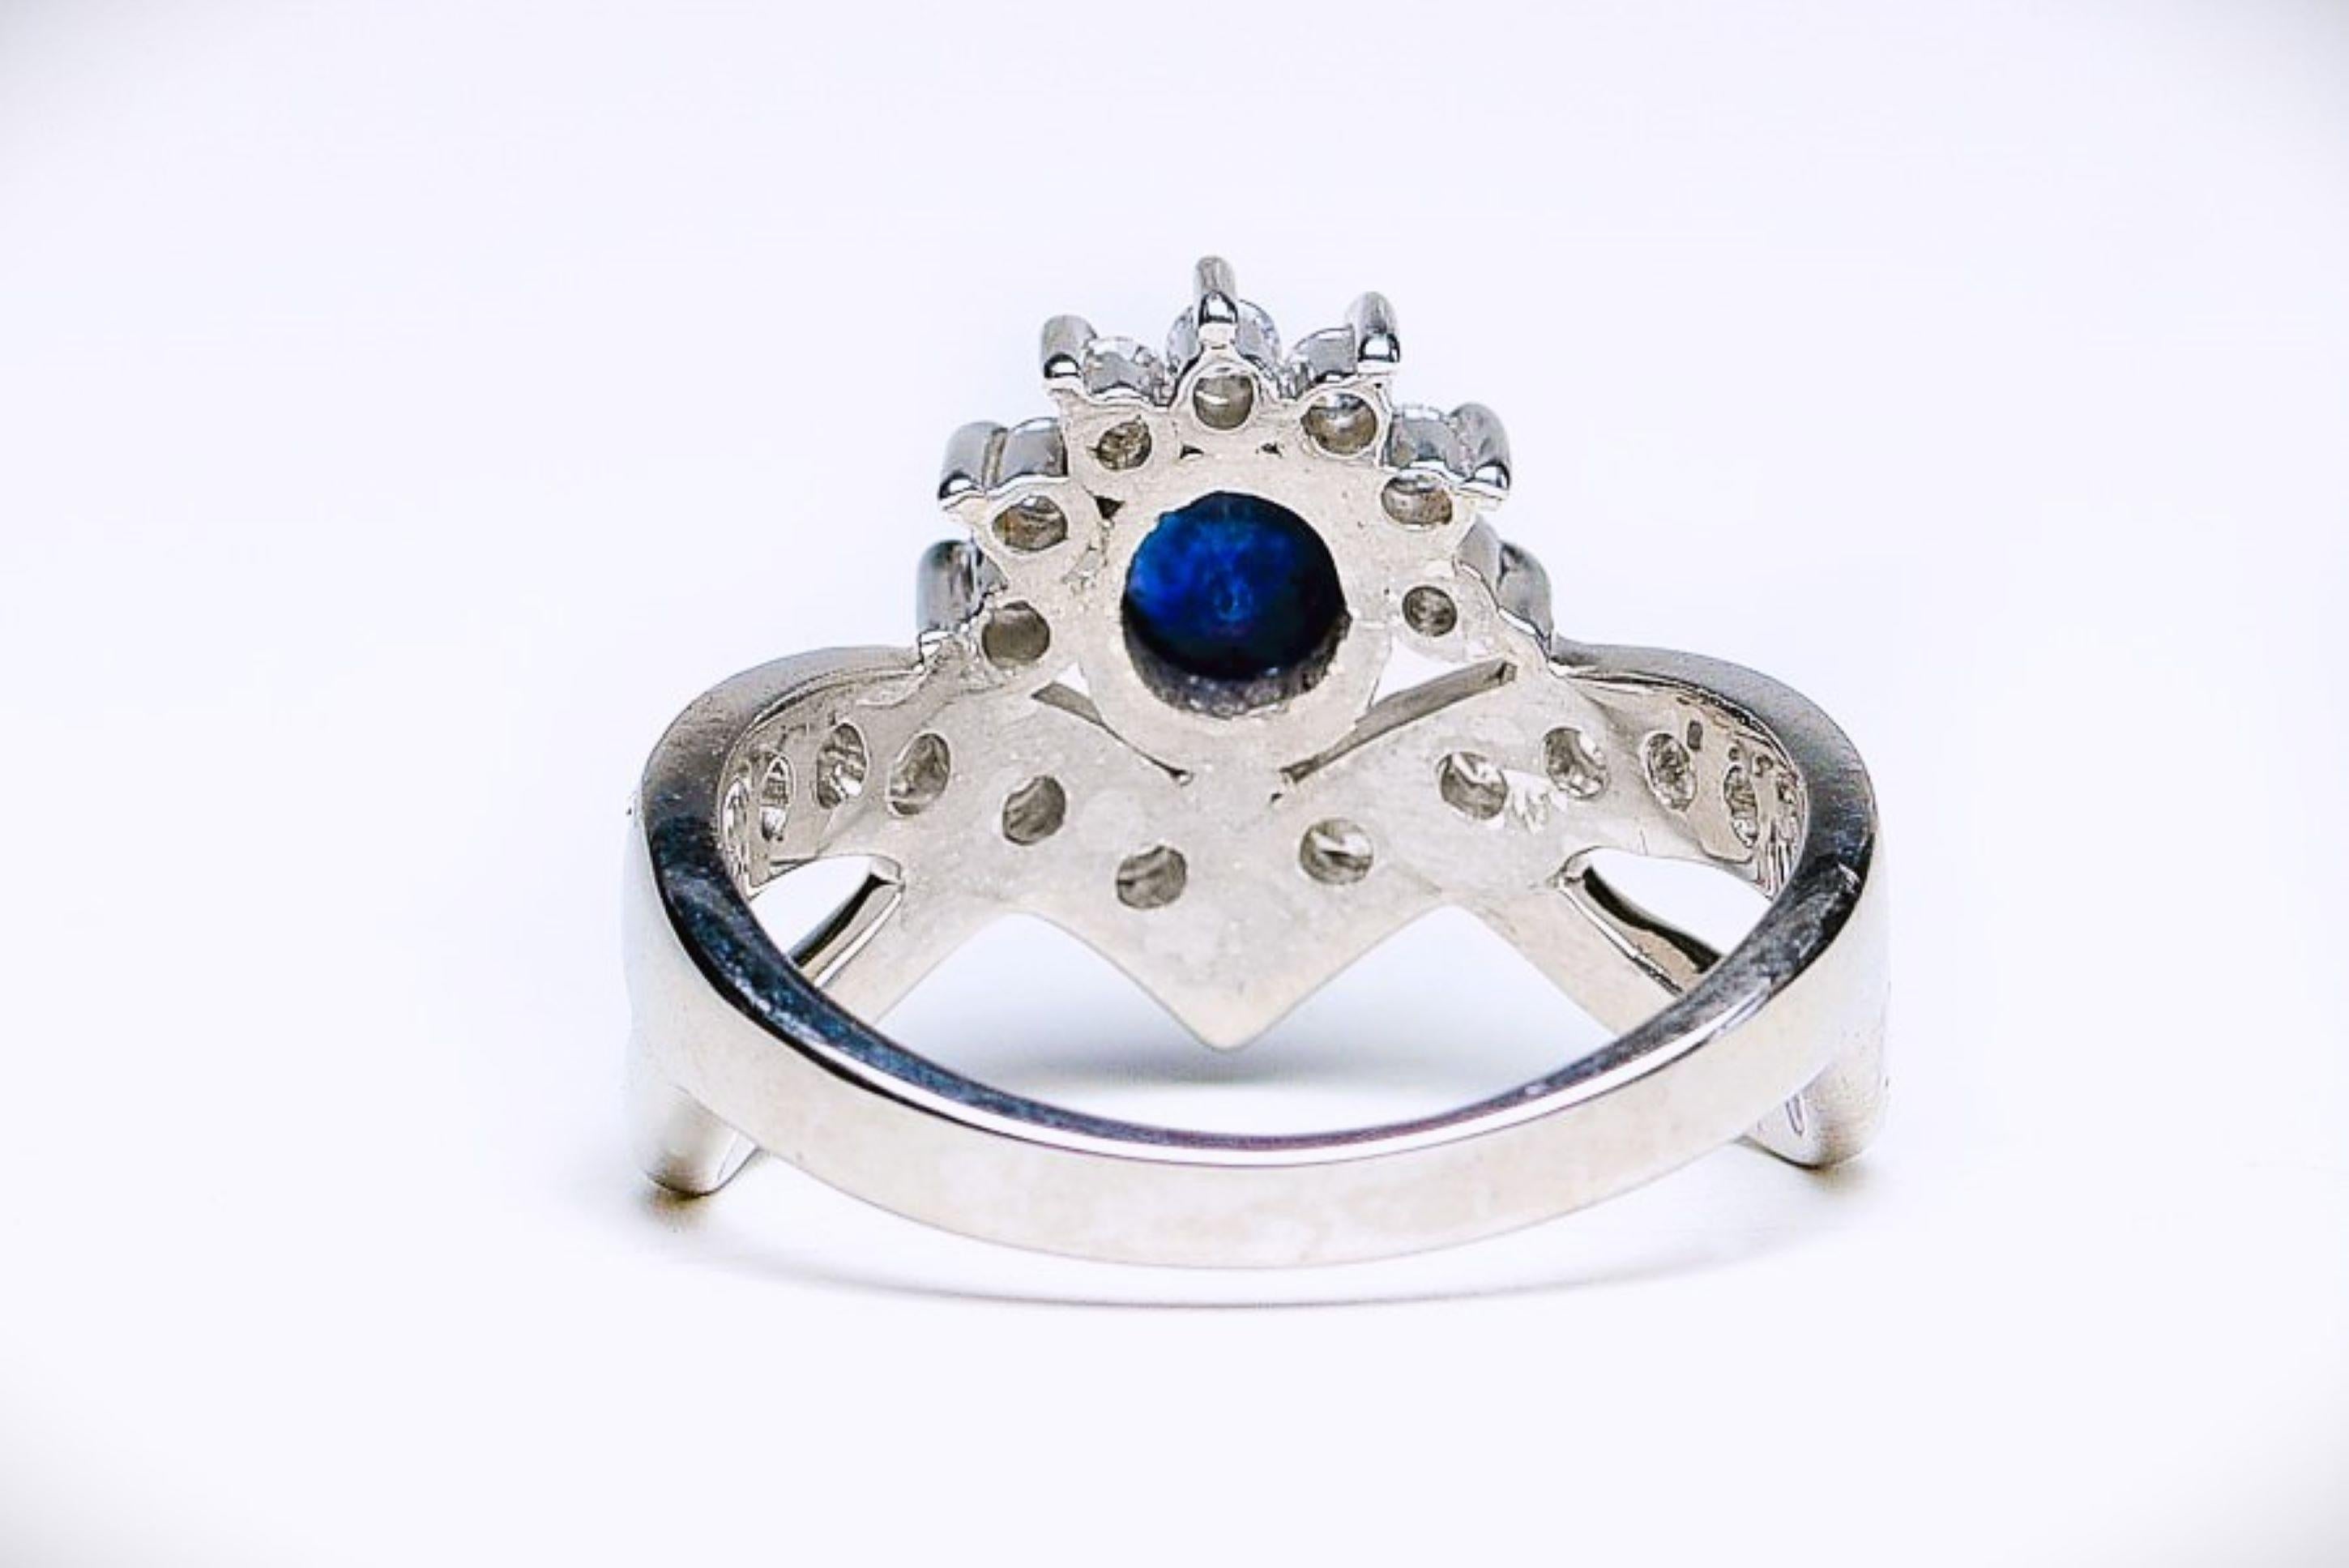 Elevate your style with the exquisite beauty of our Regal Round Cut Blue Sapphire Ring of Platinum Sterling Silver. This remarkable piece of jewelry is designed to make a lasting impression. At its heart is a captivating 1 carat round cut blue